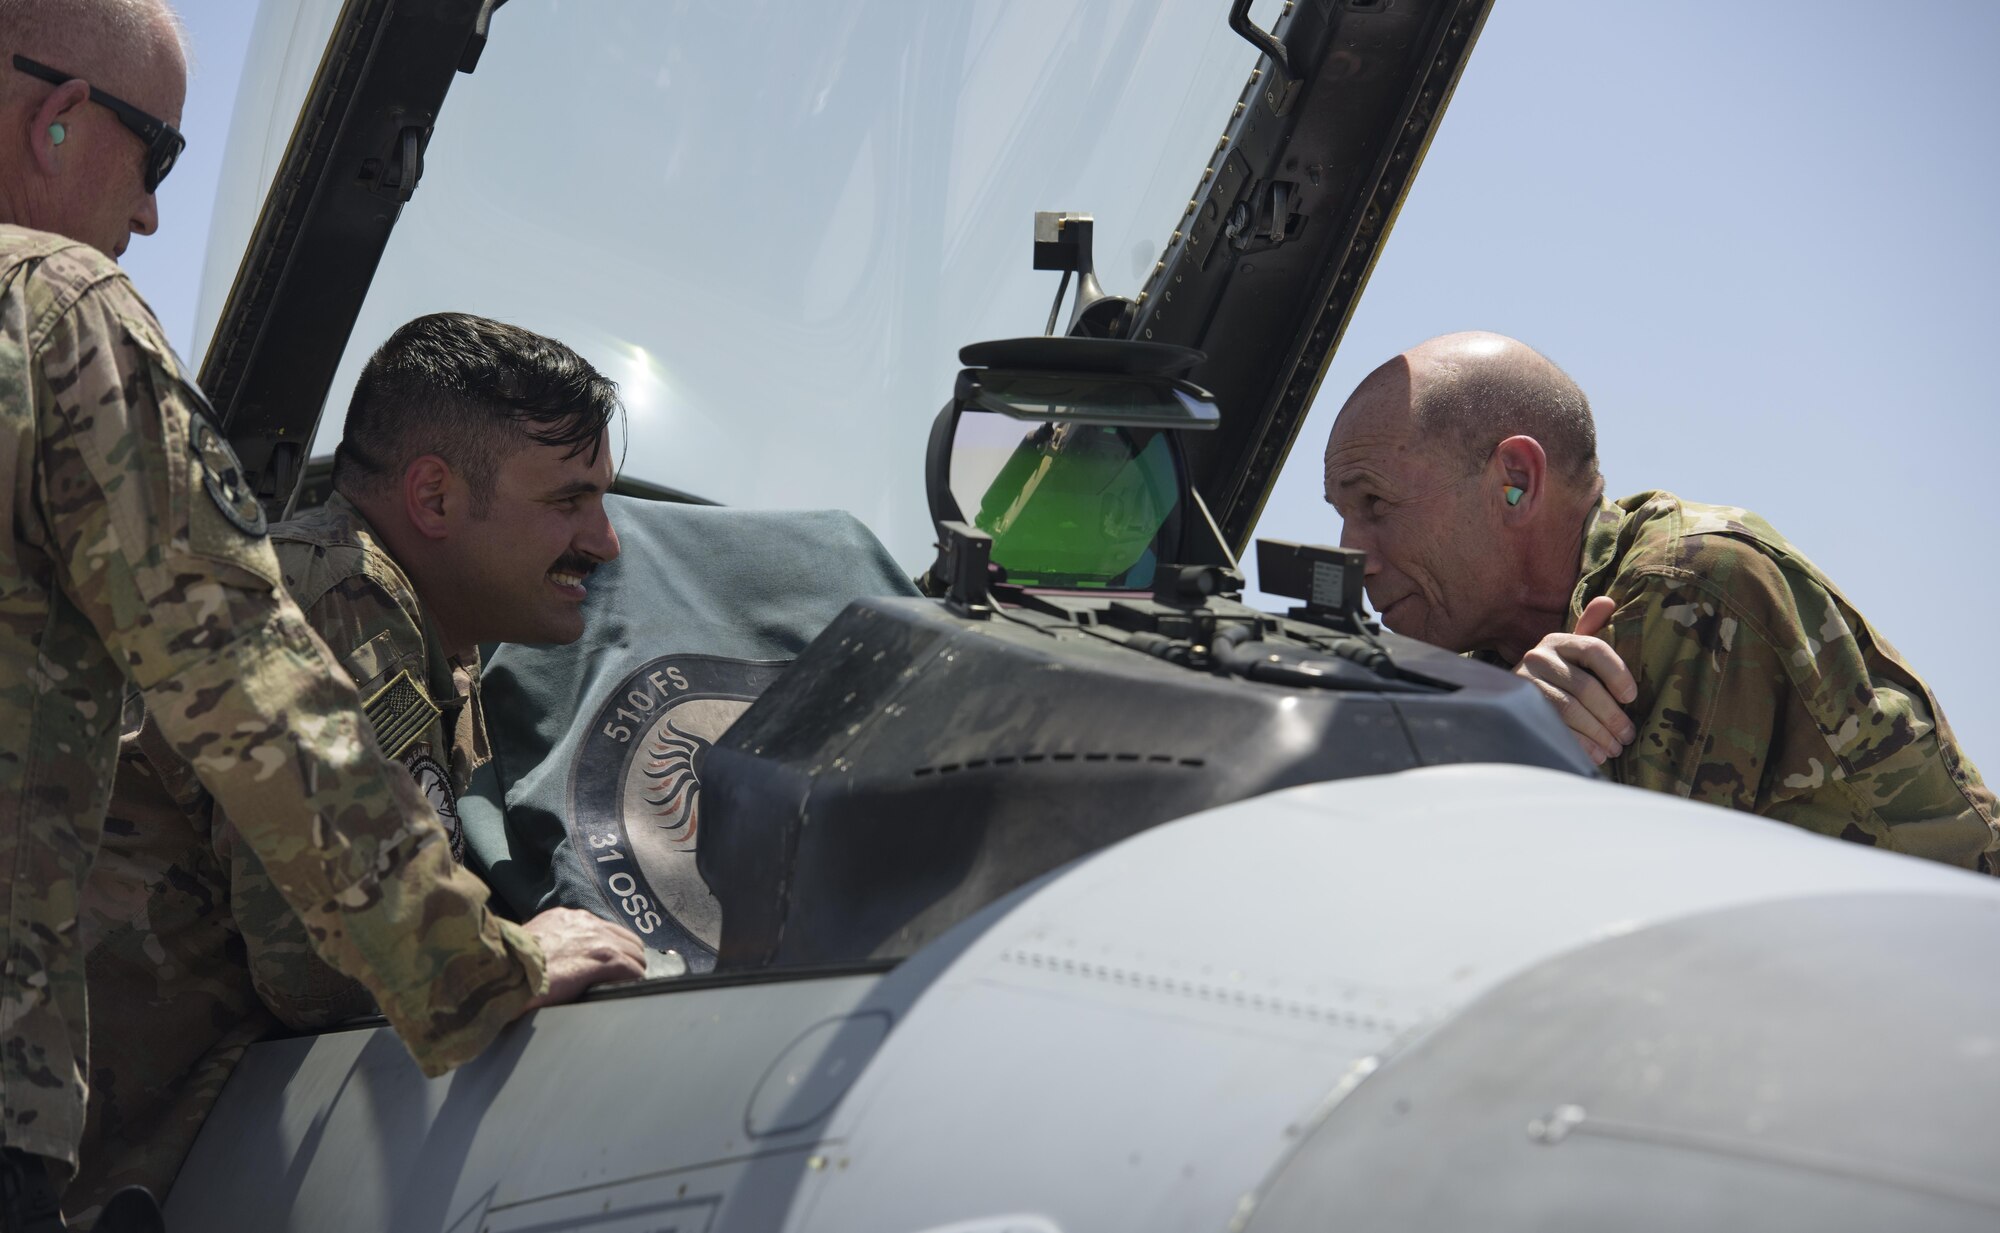 Senior Airman Christopher Caruso, 455th Expeditionary Aircraft Maintenance Squadron, speaks with Gen. Mike Holmes, commander of Air Combat Command, about the capabilities of the F-16 Fighting Falcon at Bagram Airfield, Afghanistan, May 25, 2017. Holmes commanded the 455th Air Expeditionary Wing from March 2008 to April 2009. (U.S. Air Force photo by Staff Sgt. Benjamin Gonsier)